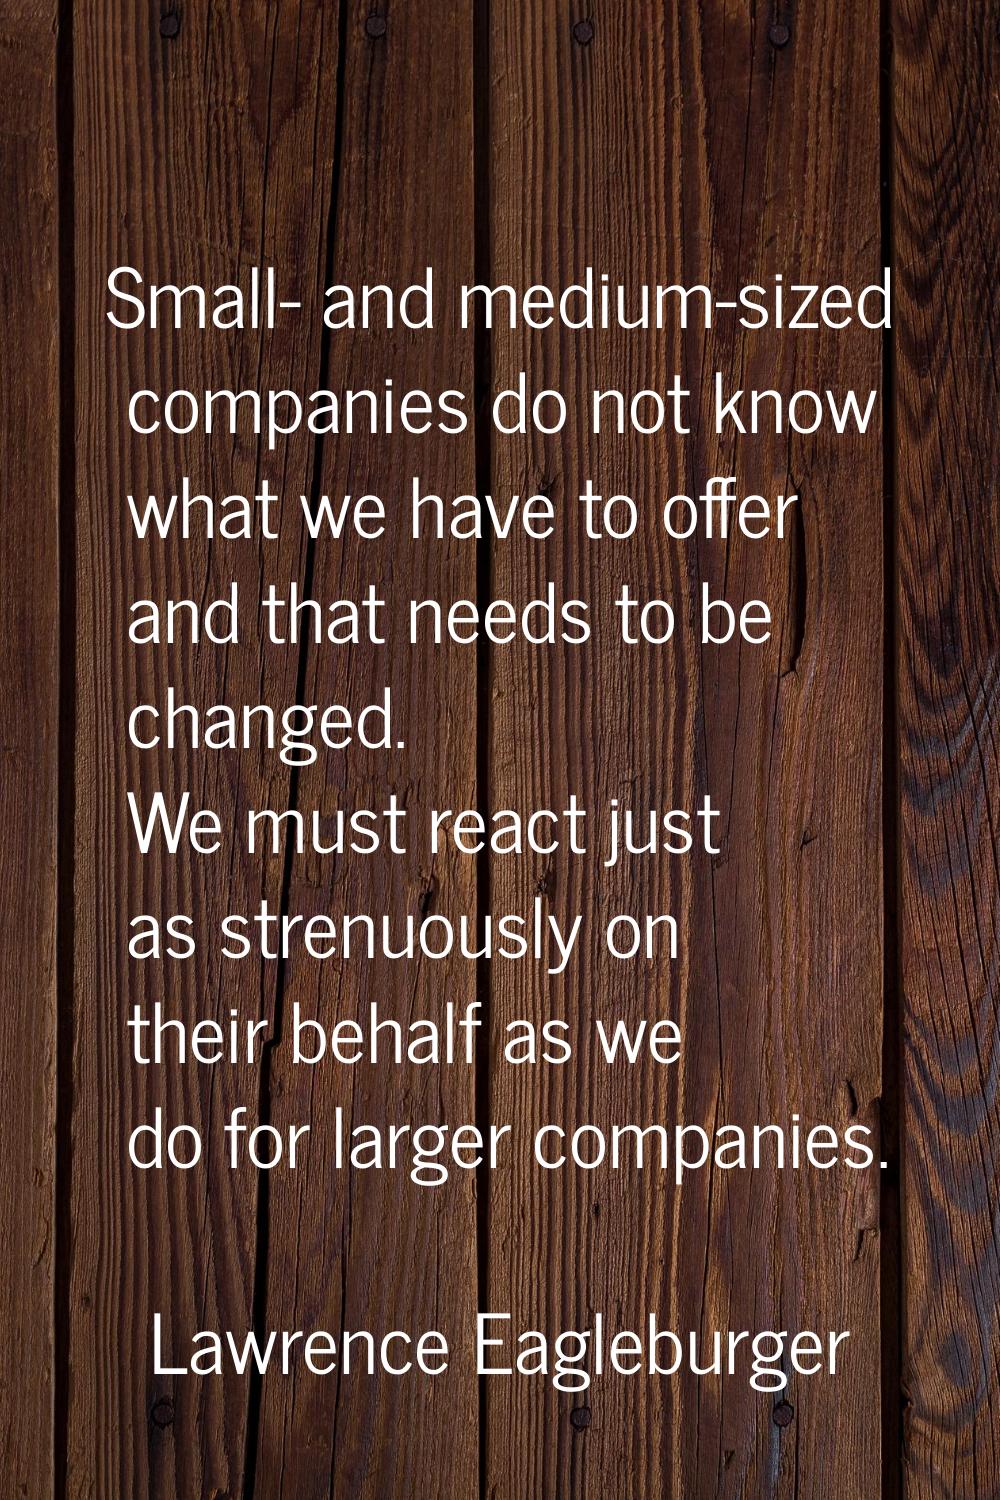 Small- and medium-sized companies do not know what we have to offer and that needs to be changed. W